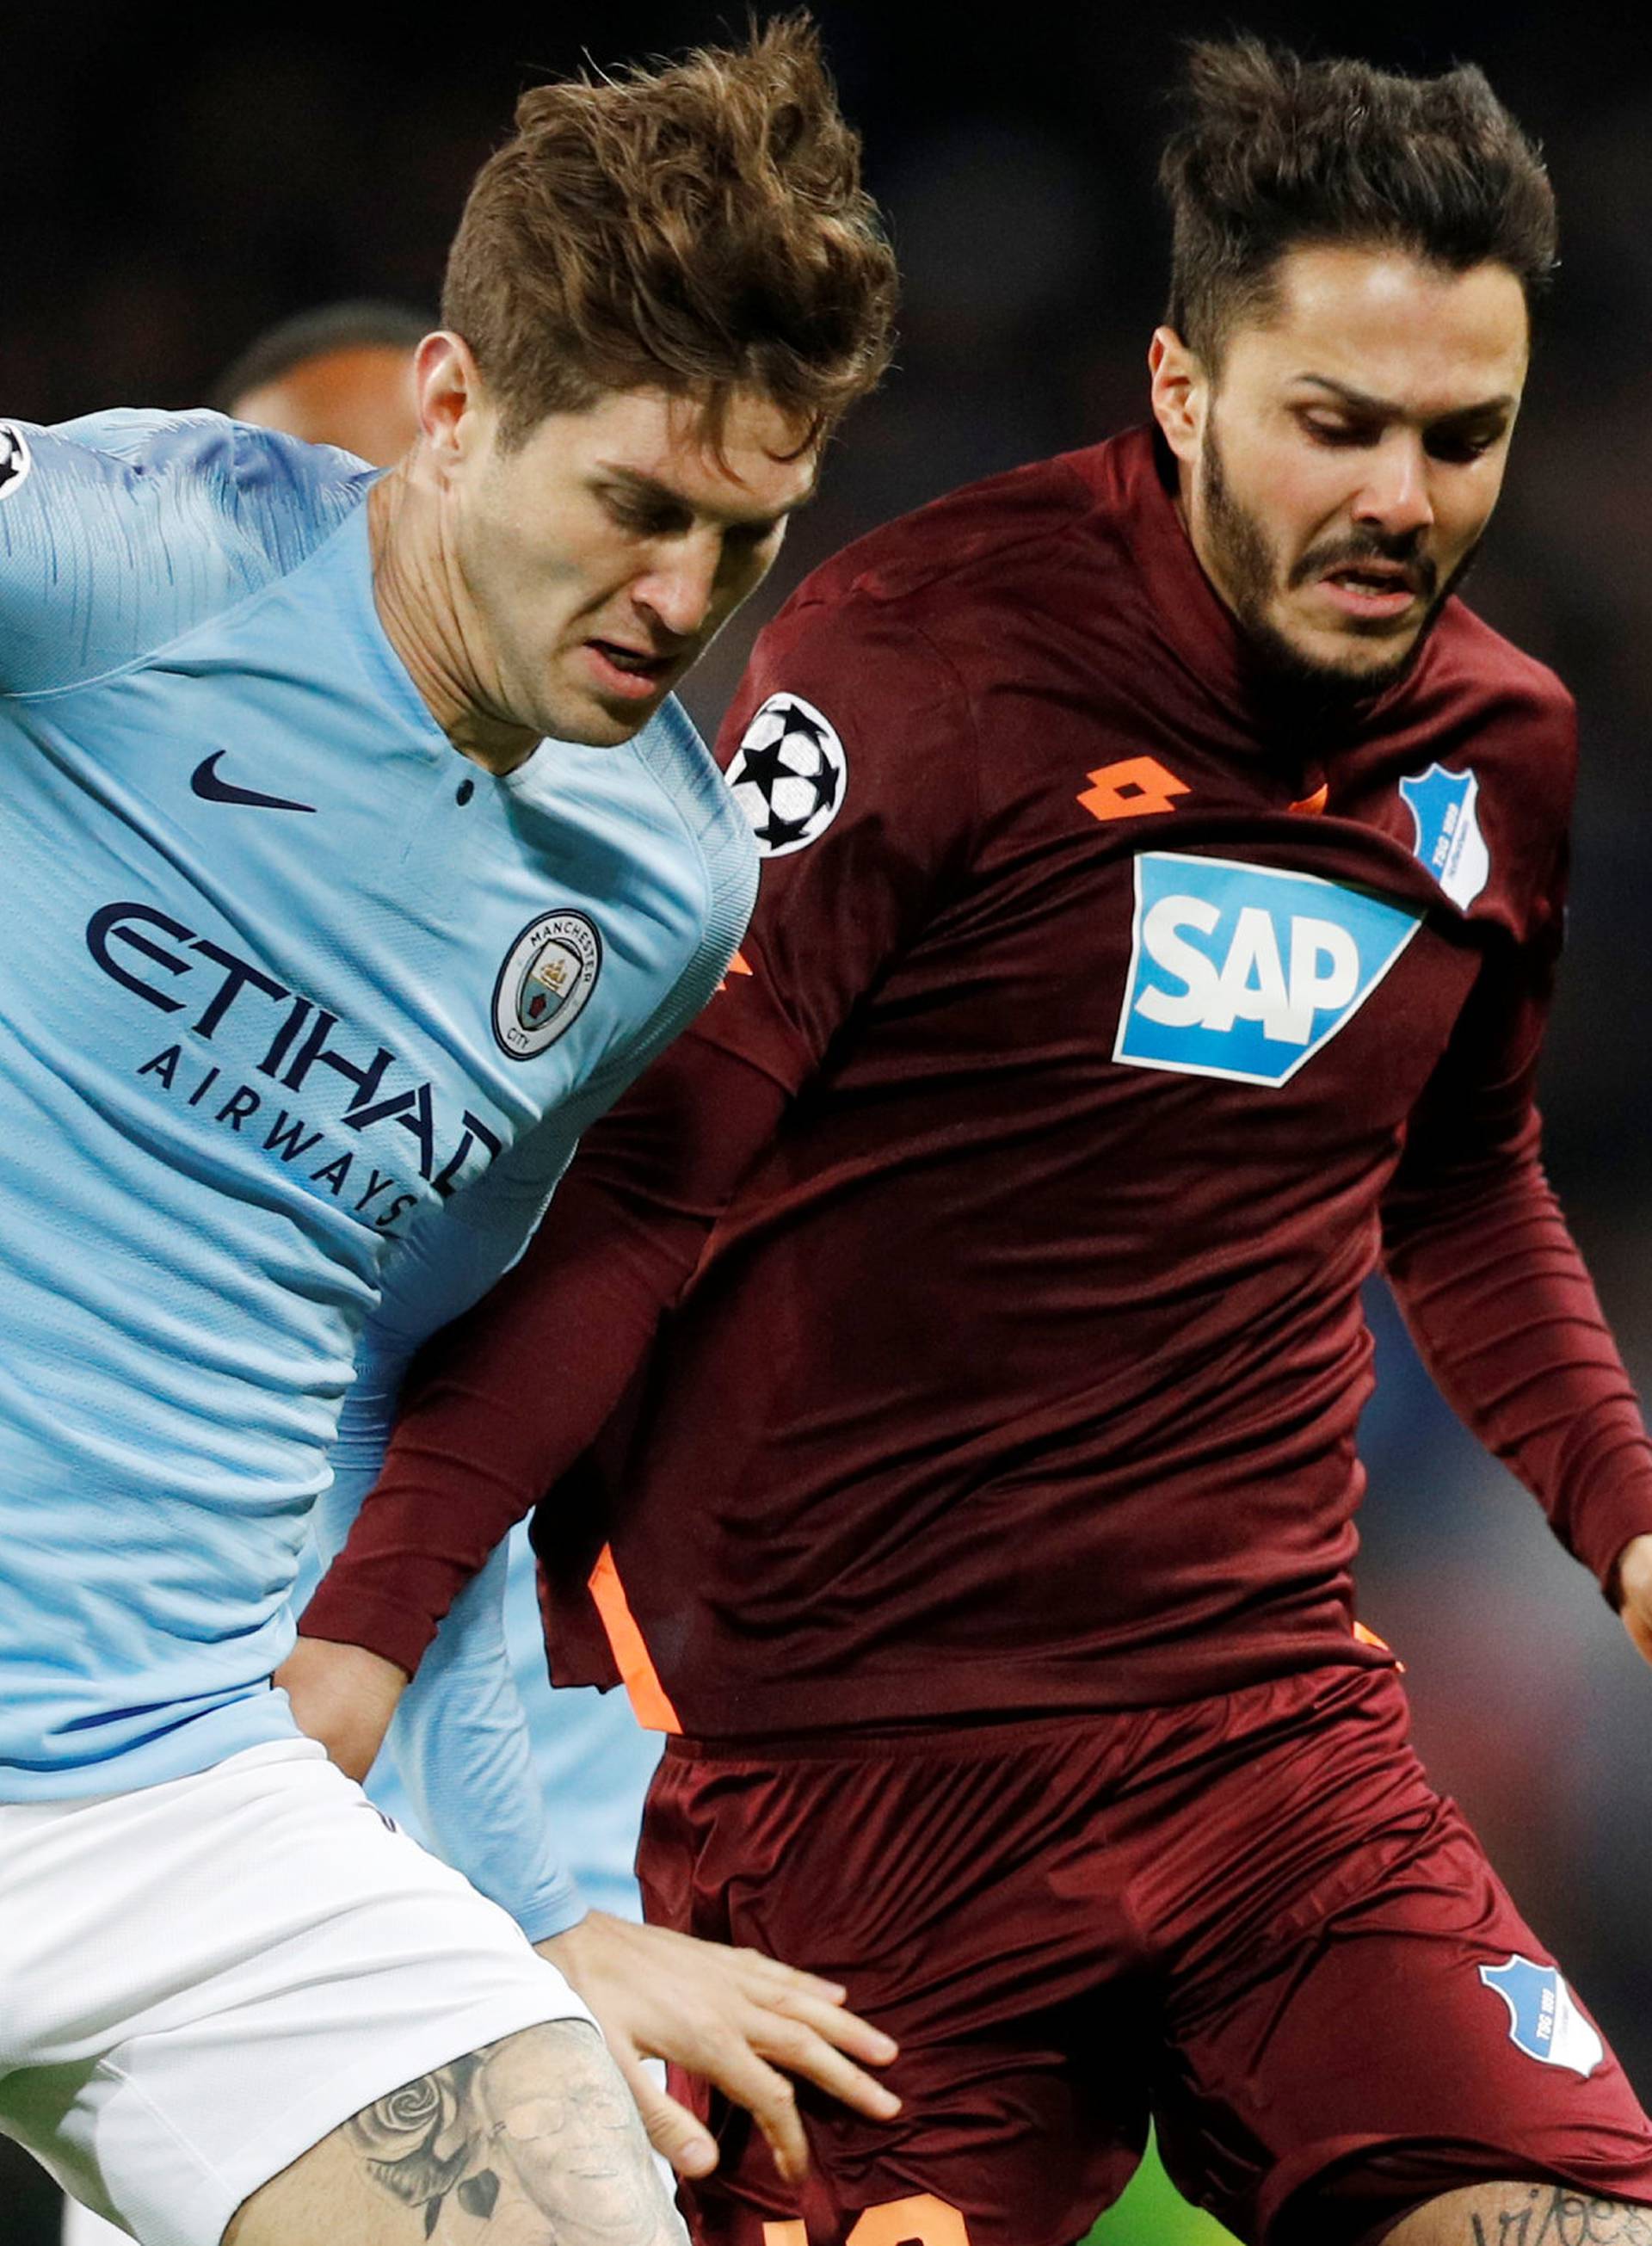 Champions League - Group Stage - Group F - Manchester City v TSG 1899 Hoffenheim